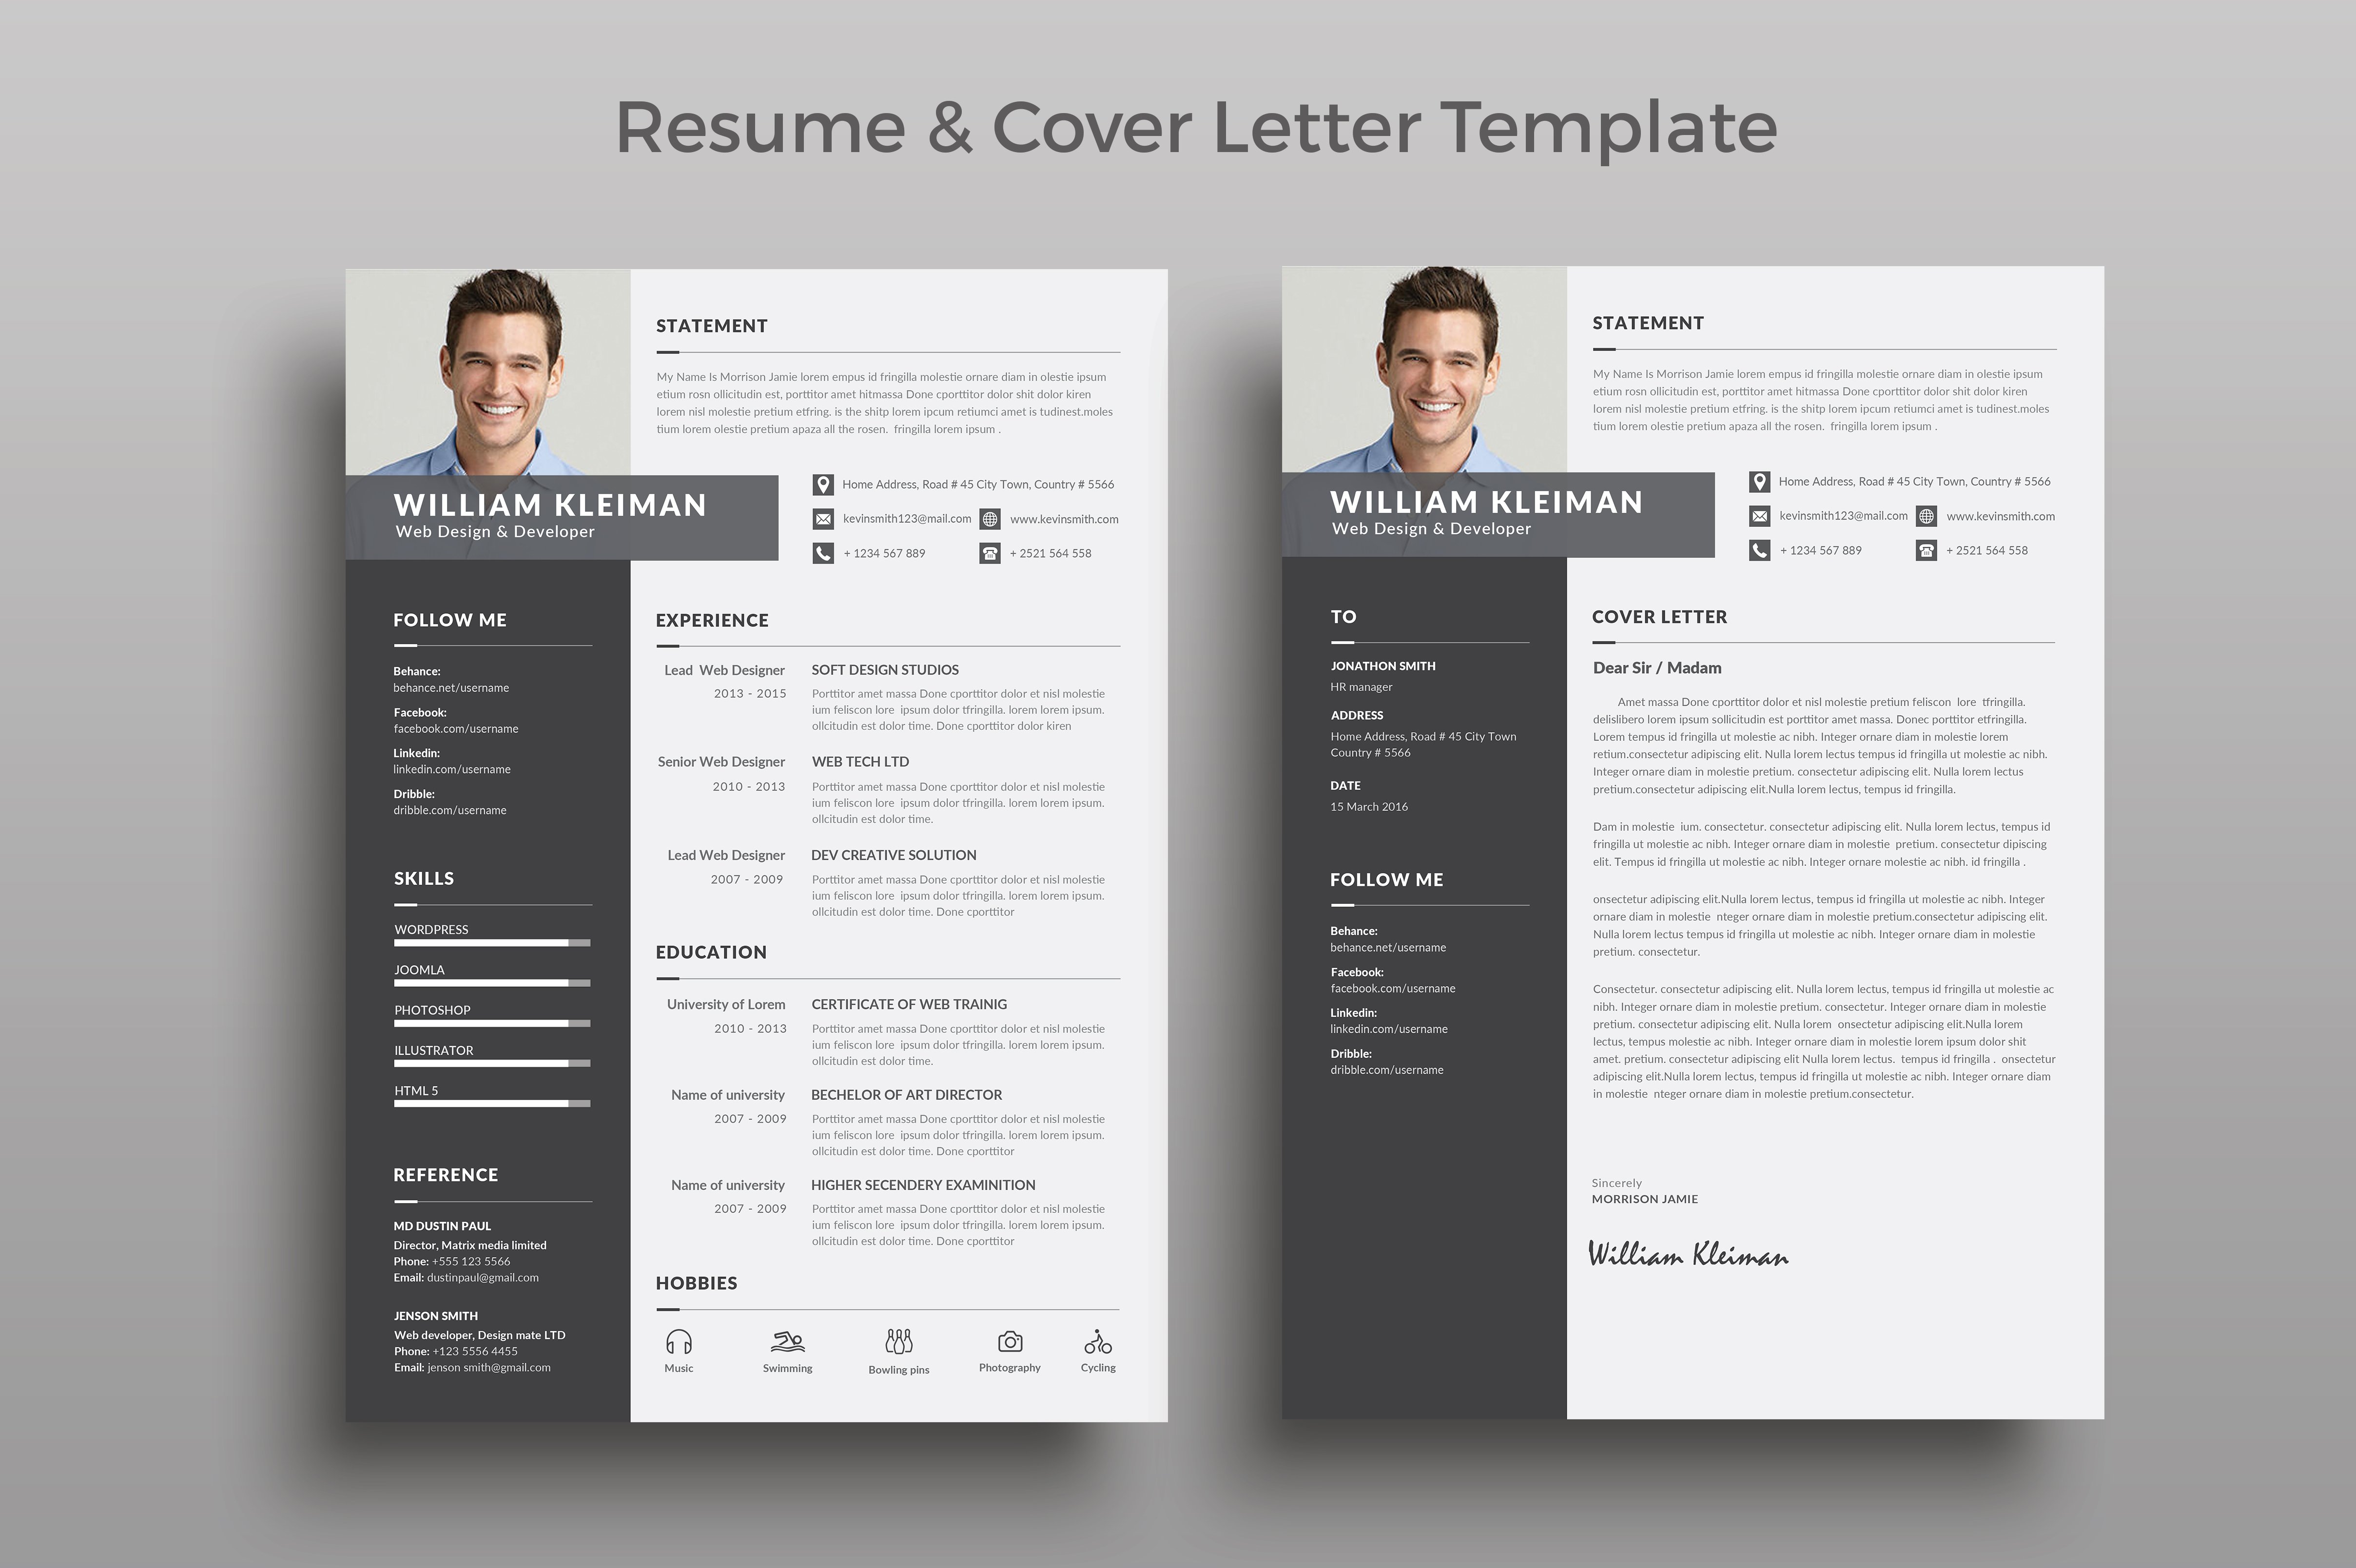 Two resume templates with a black and white theme.